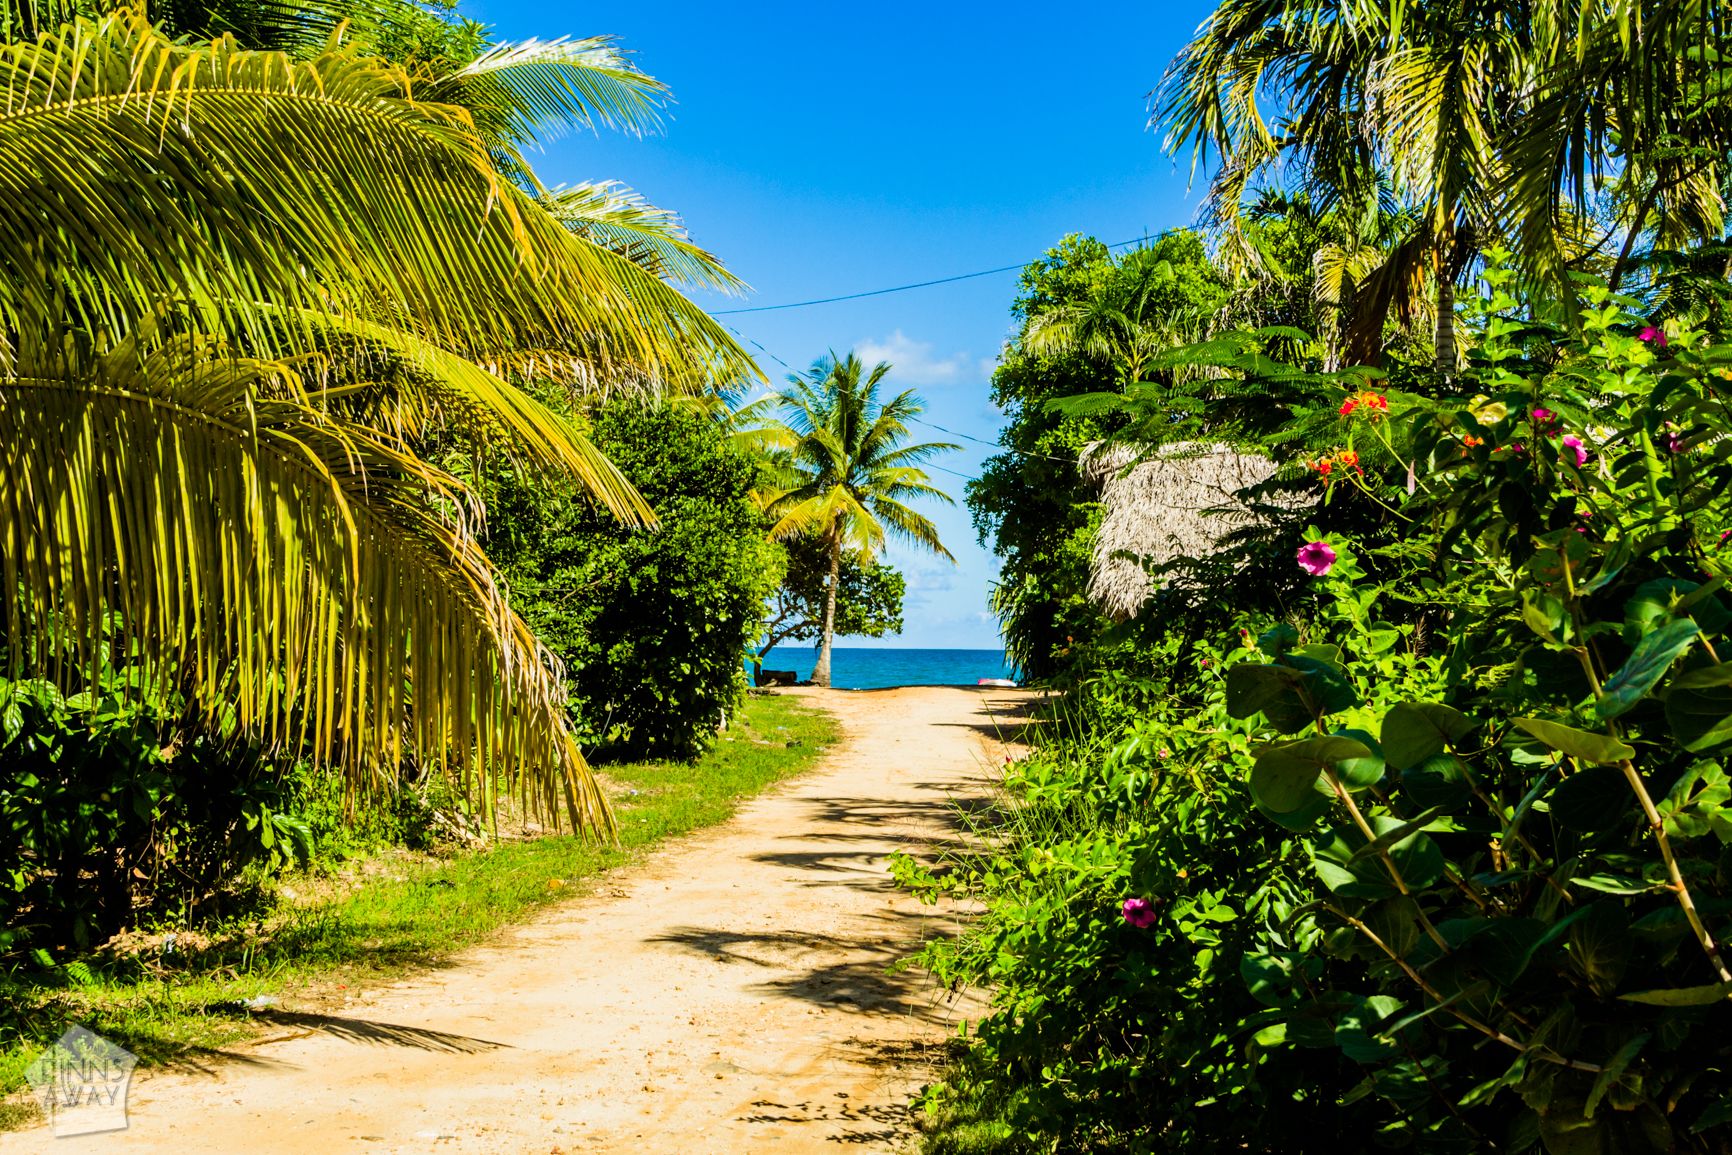 Path to the beach | Travel guide to Hopkins, Belize | FinnsAway Travel Blog